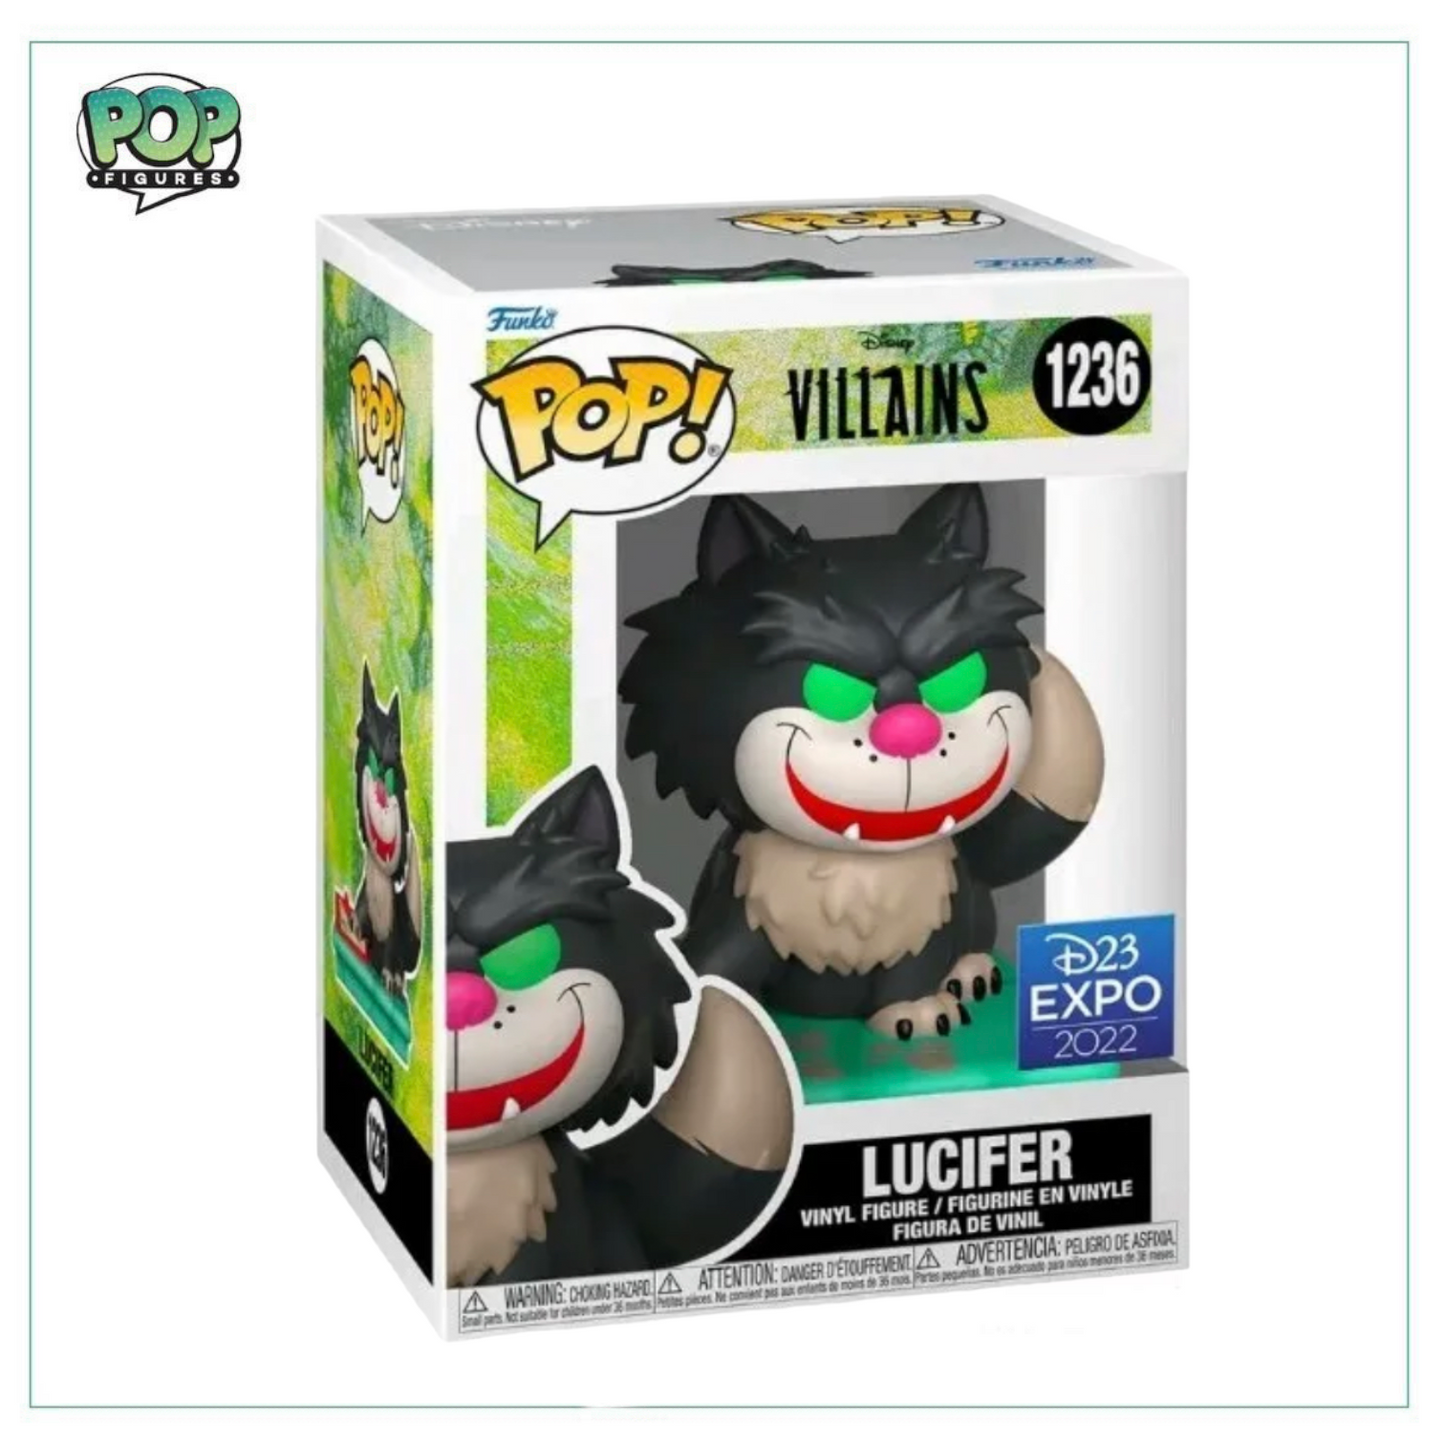 Lucifer #1236 Funko Pop! Disney Villains - 2022 D23 Expo Exclusive - Angry Cat